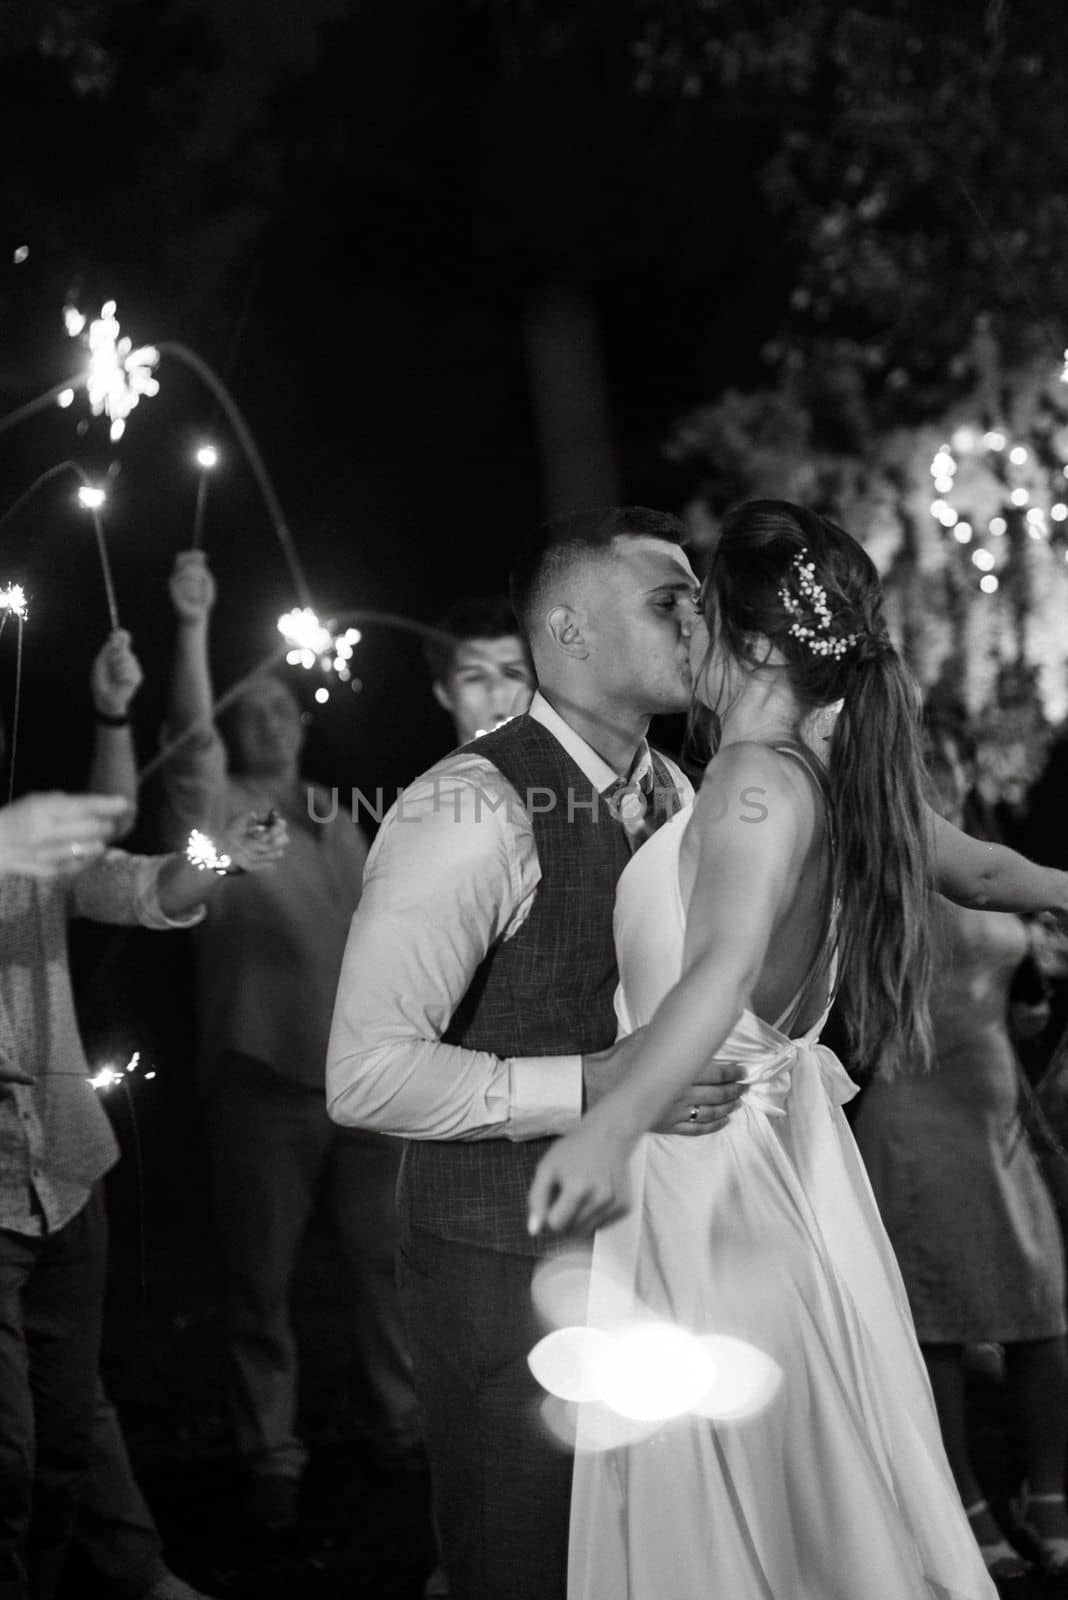 newlyweds at a wedding in the corridor of sparklers